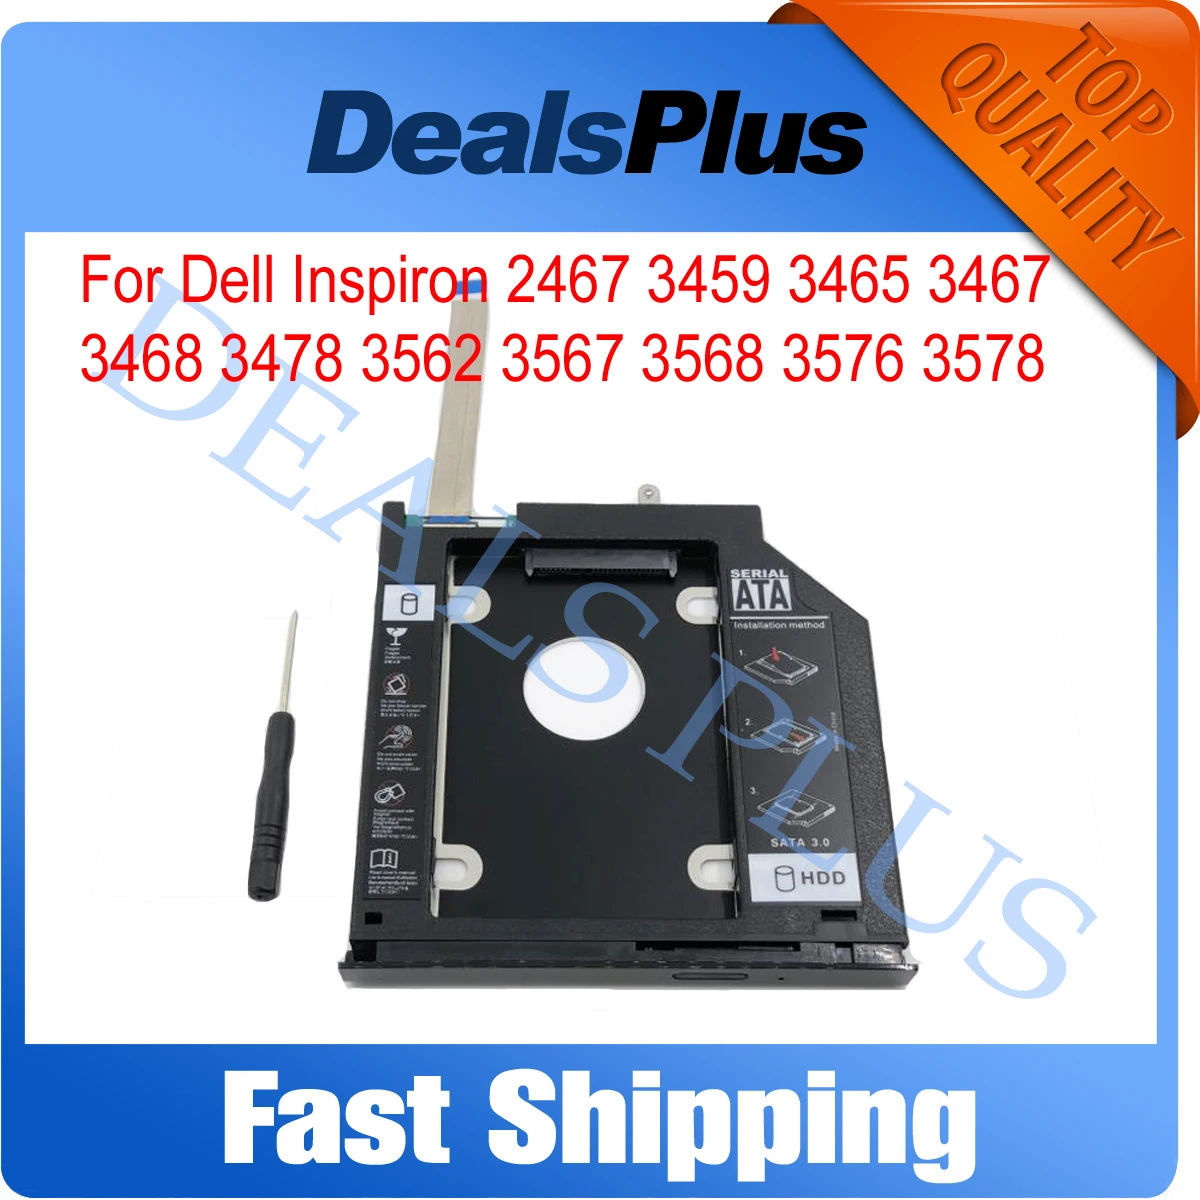 

New 9.5mm 2nd SSD HDD Hard Disk Drive Caddy Replacement For Dell Inspiron 2467 3459 3465 3467 3468 3478 3562 3567 3568 3576 3578